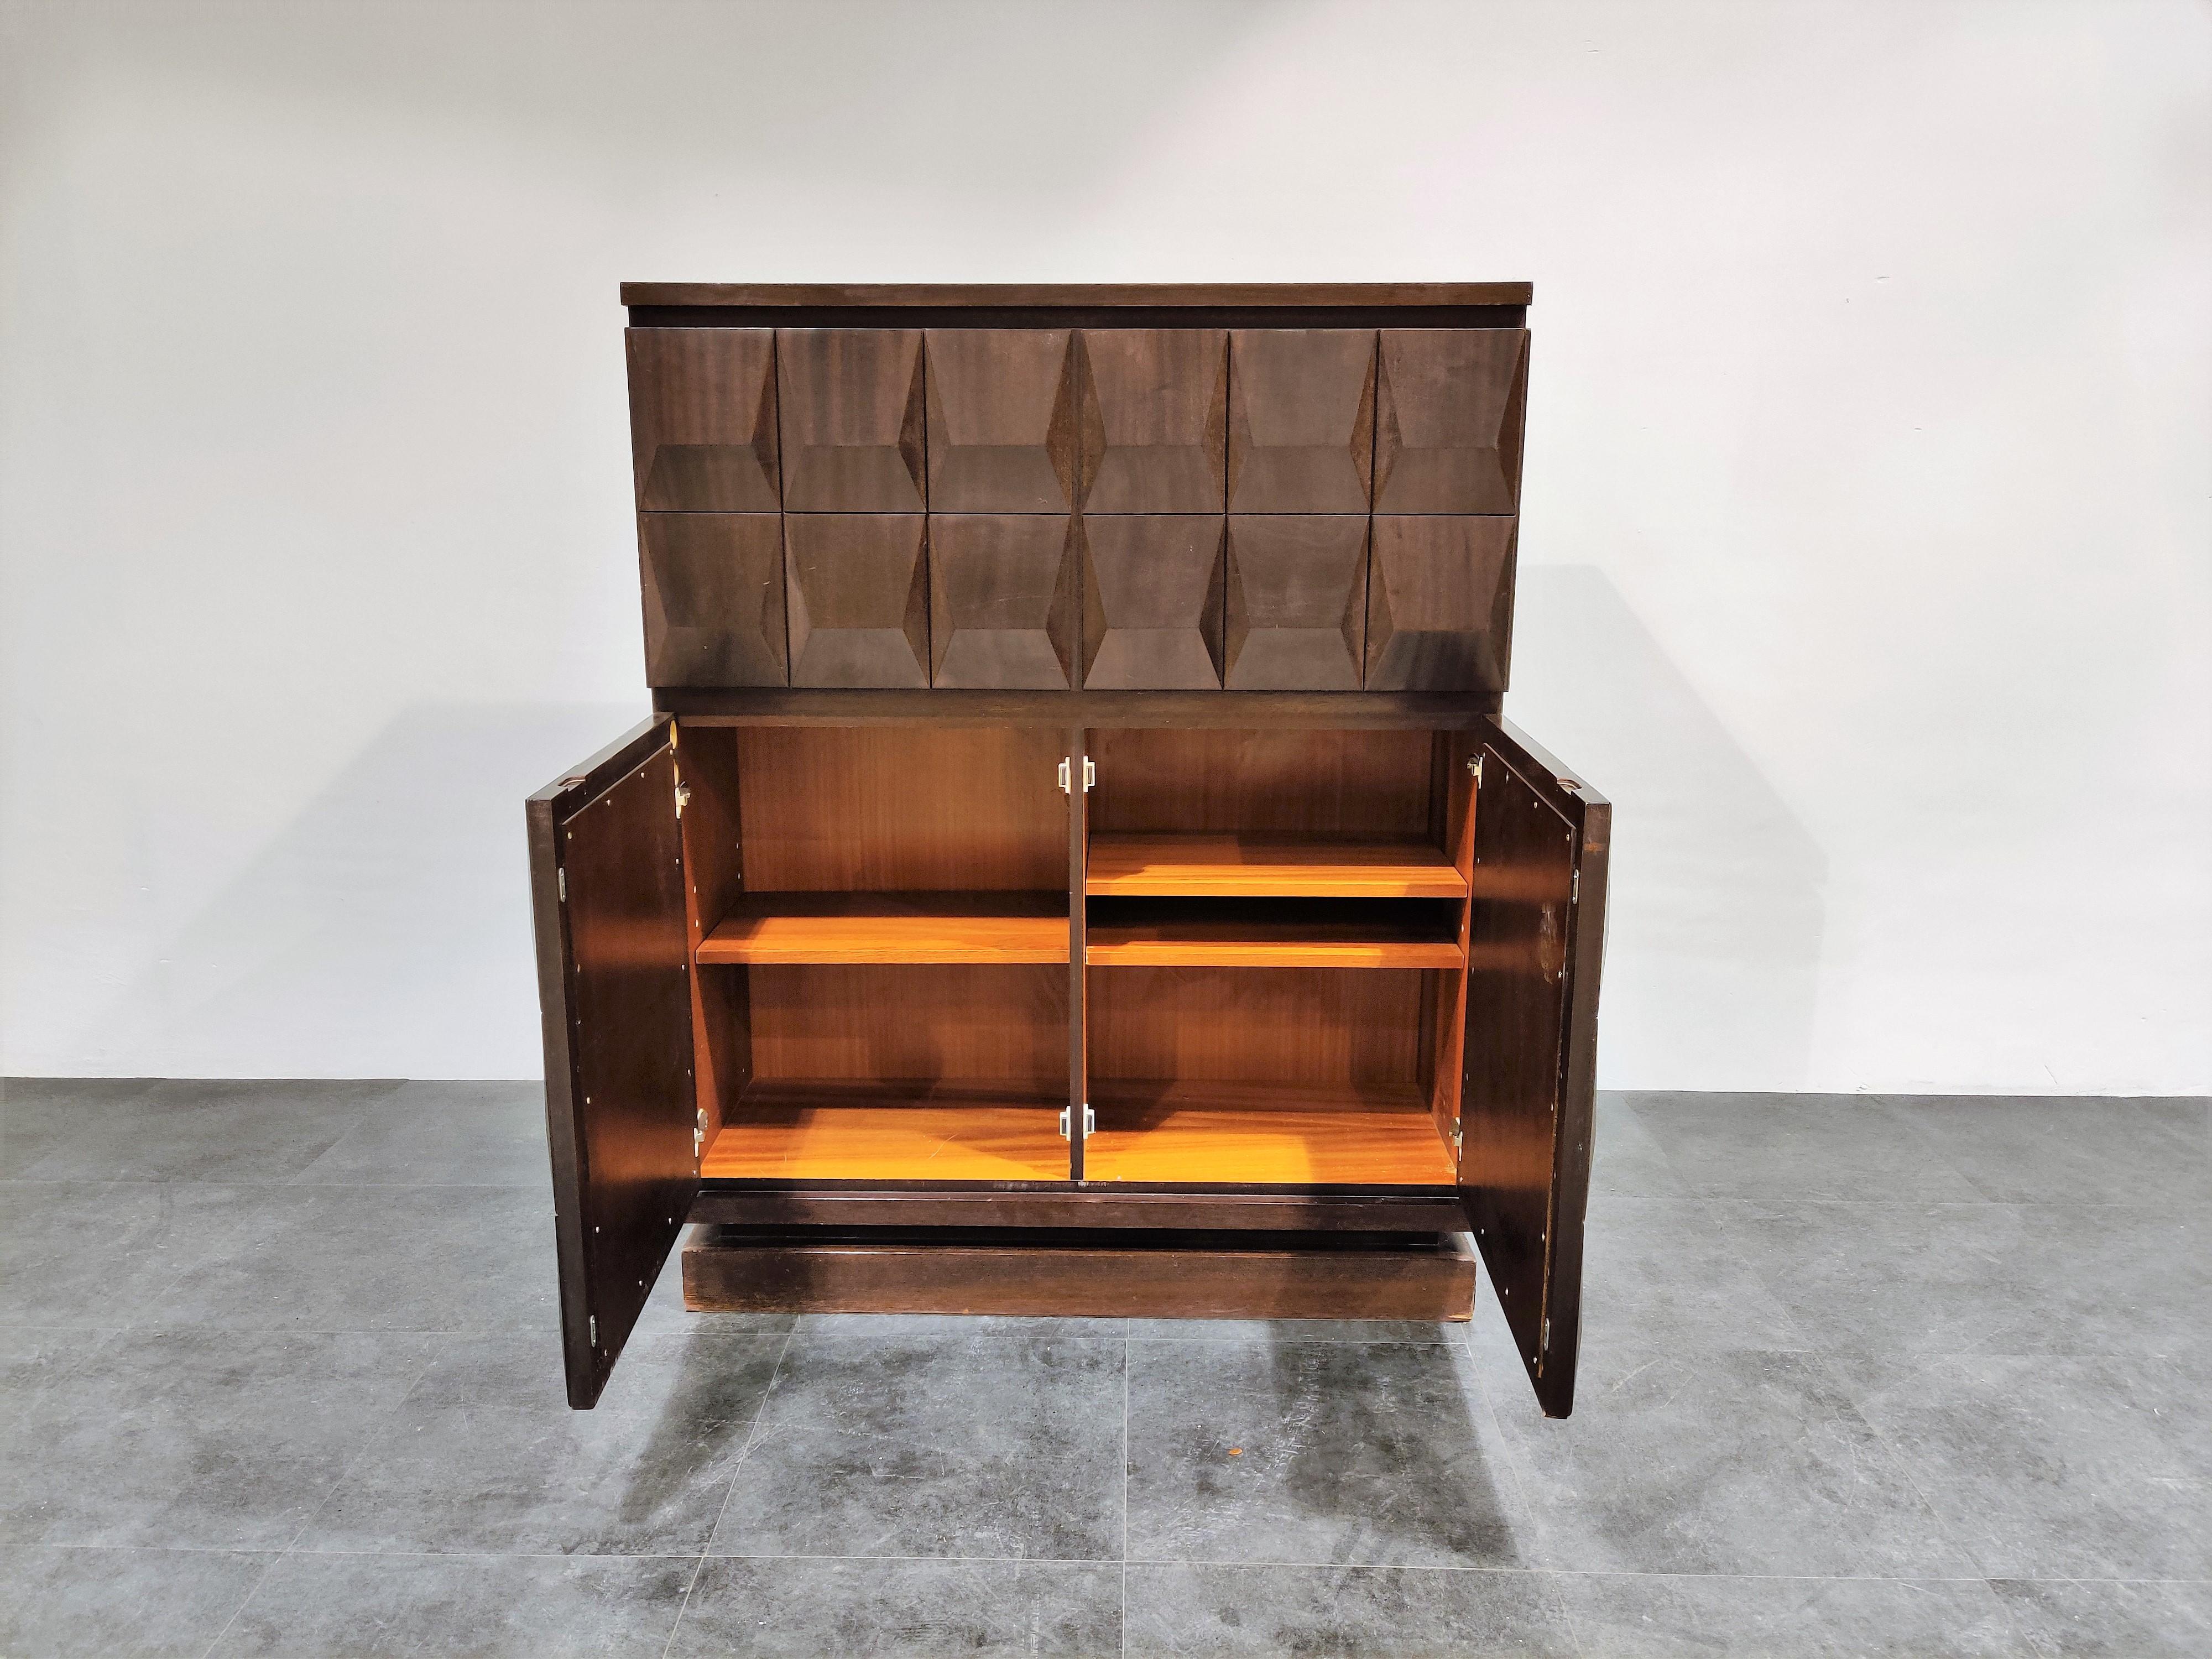 Mid century graphical brutalist bar cabinet with two doors and a fold down door.

Beautiful timeless design in chocolate brown wood.

Condition, some sratches due to use but good overall condition.

1970s - Belgium

Dimensions:

Lenght